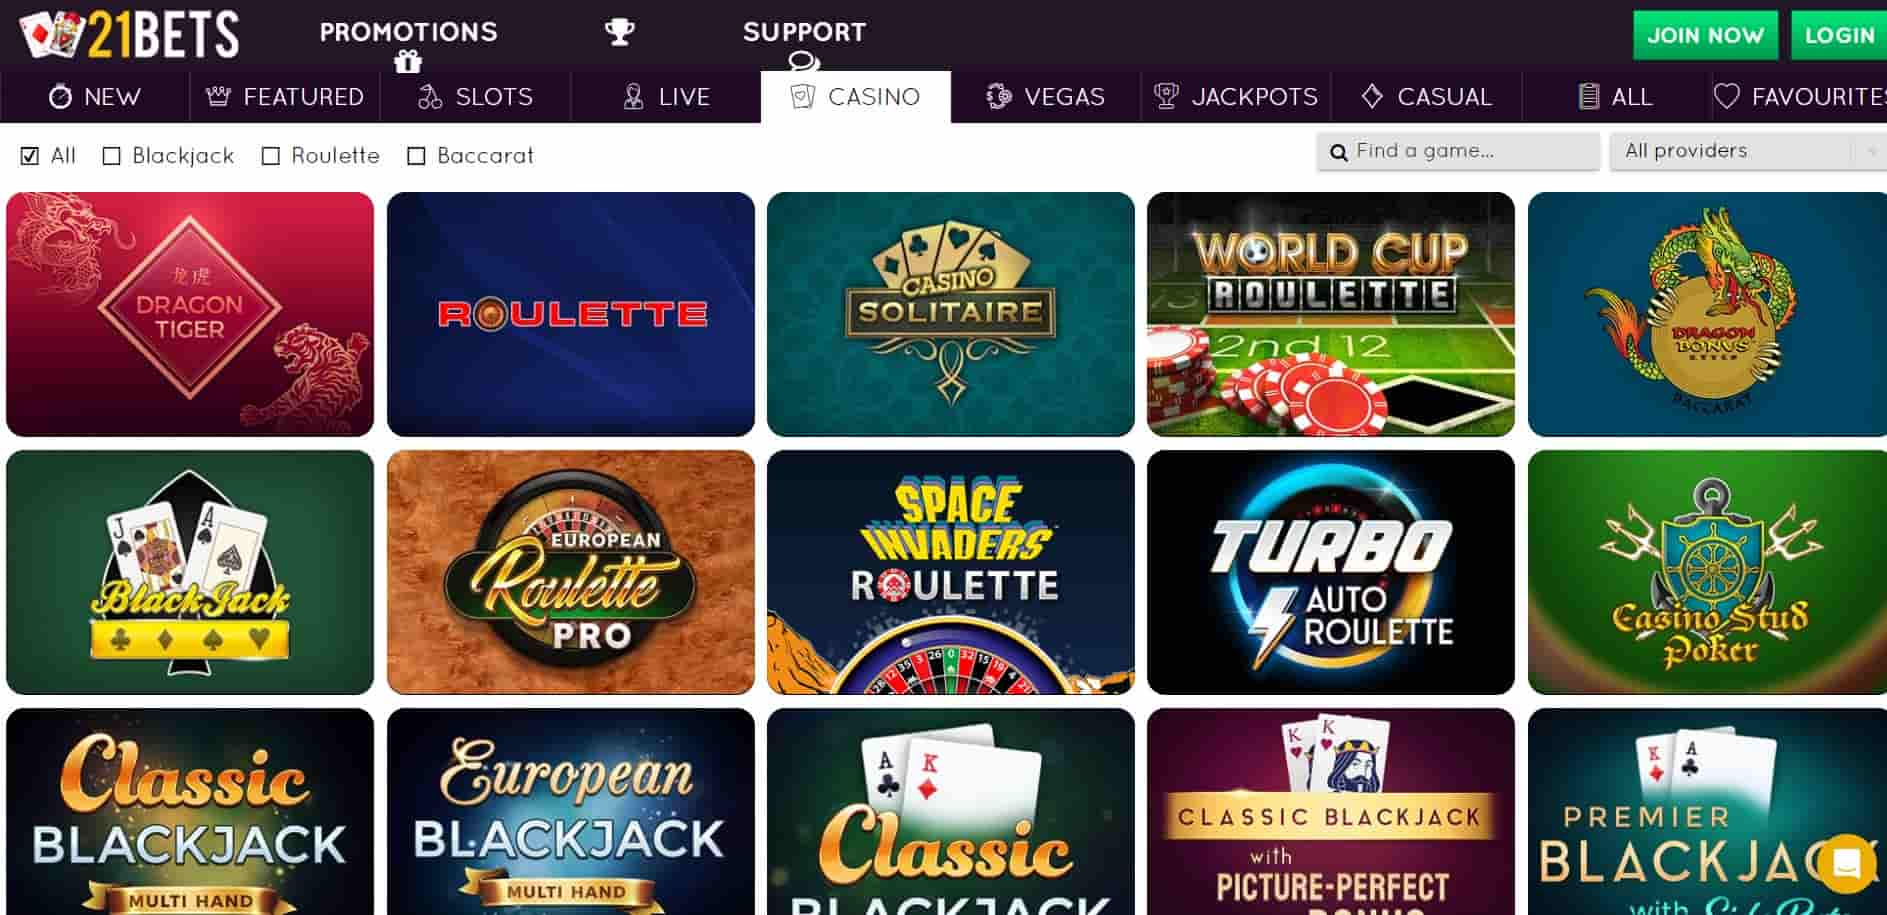 21 bets live casino table games